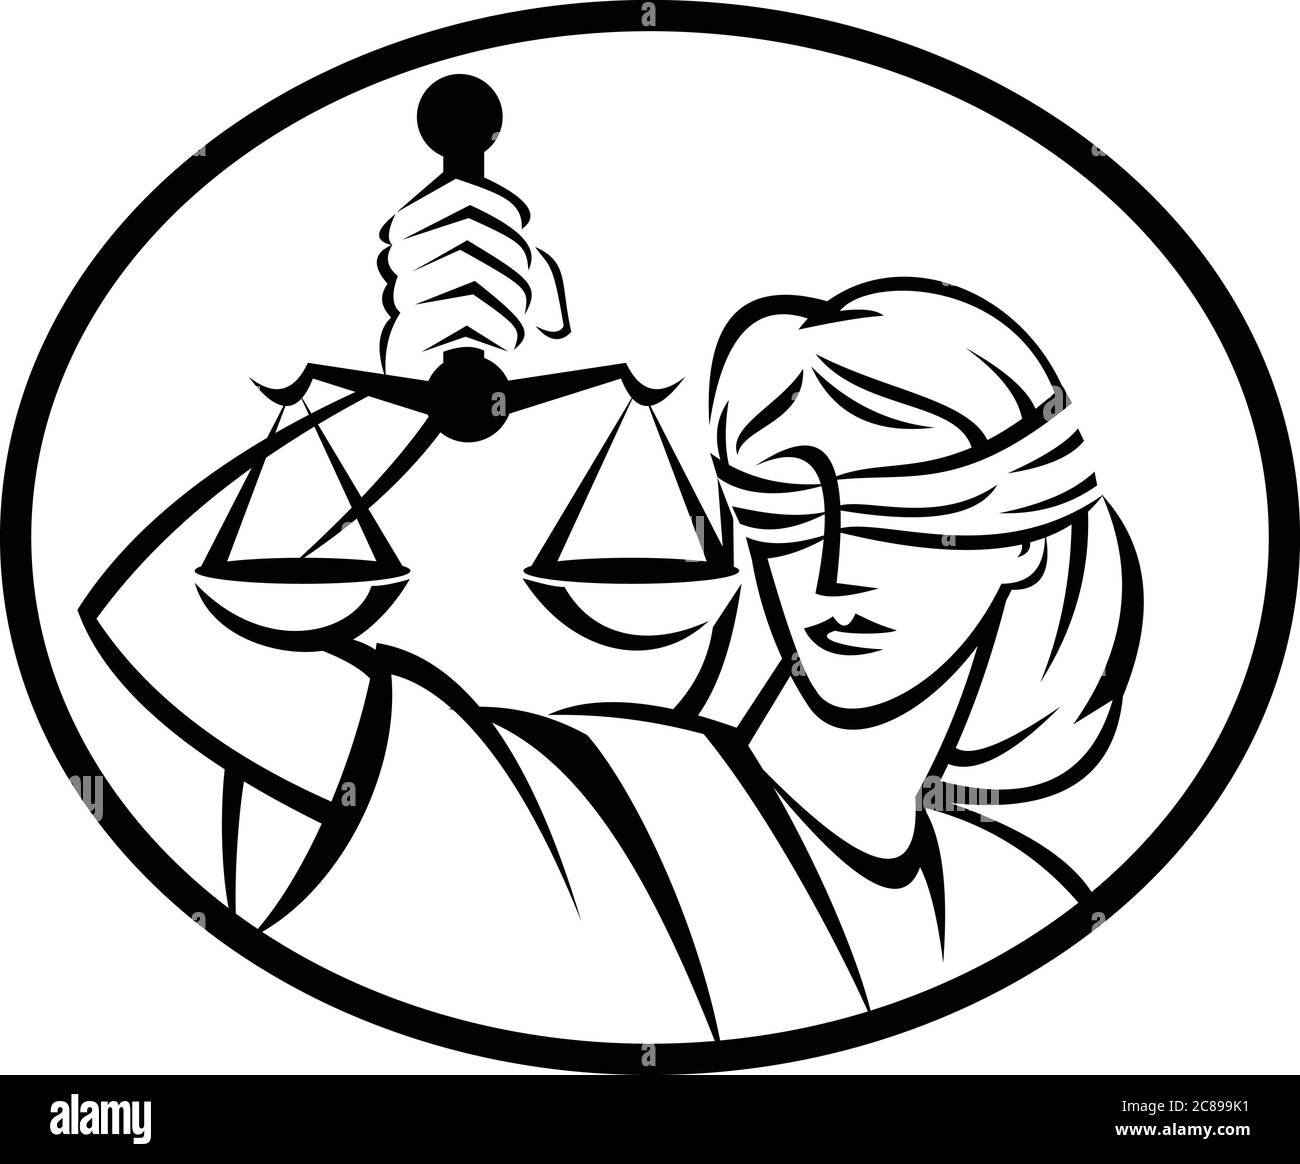 https://c8.alamy.com/comp/2C899K1/retro-style-illustration-of-lady-justice-with-blindfold-and-beam-balance-or-weighing-scale-set-inside-oval-on-isolated-background-done-in-black-and-wh-2C899K1.jpg